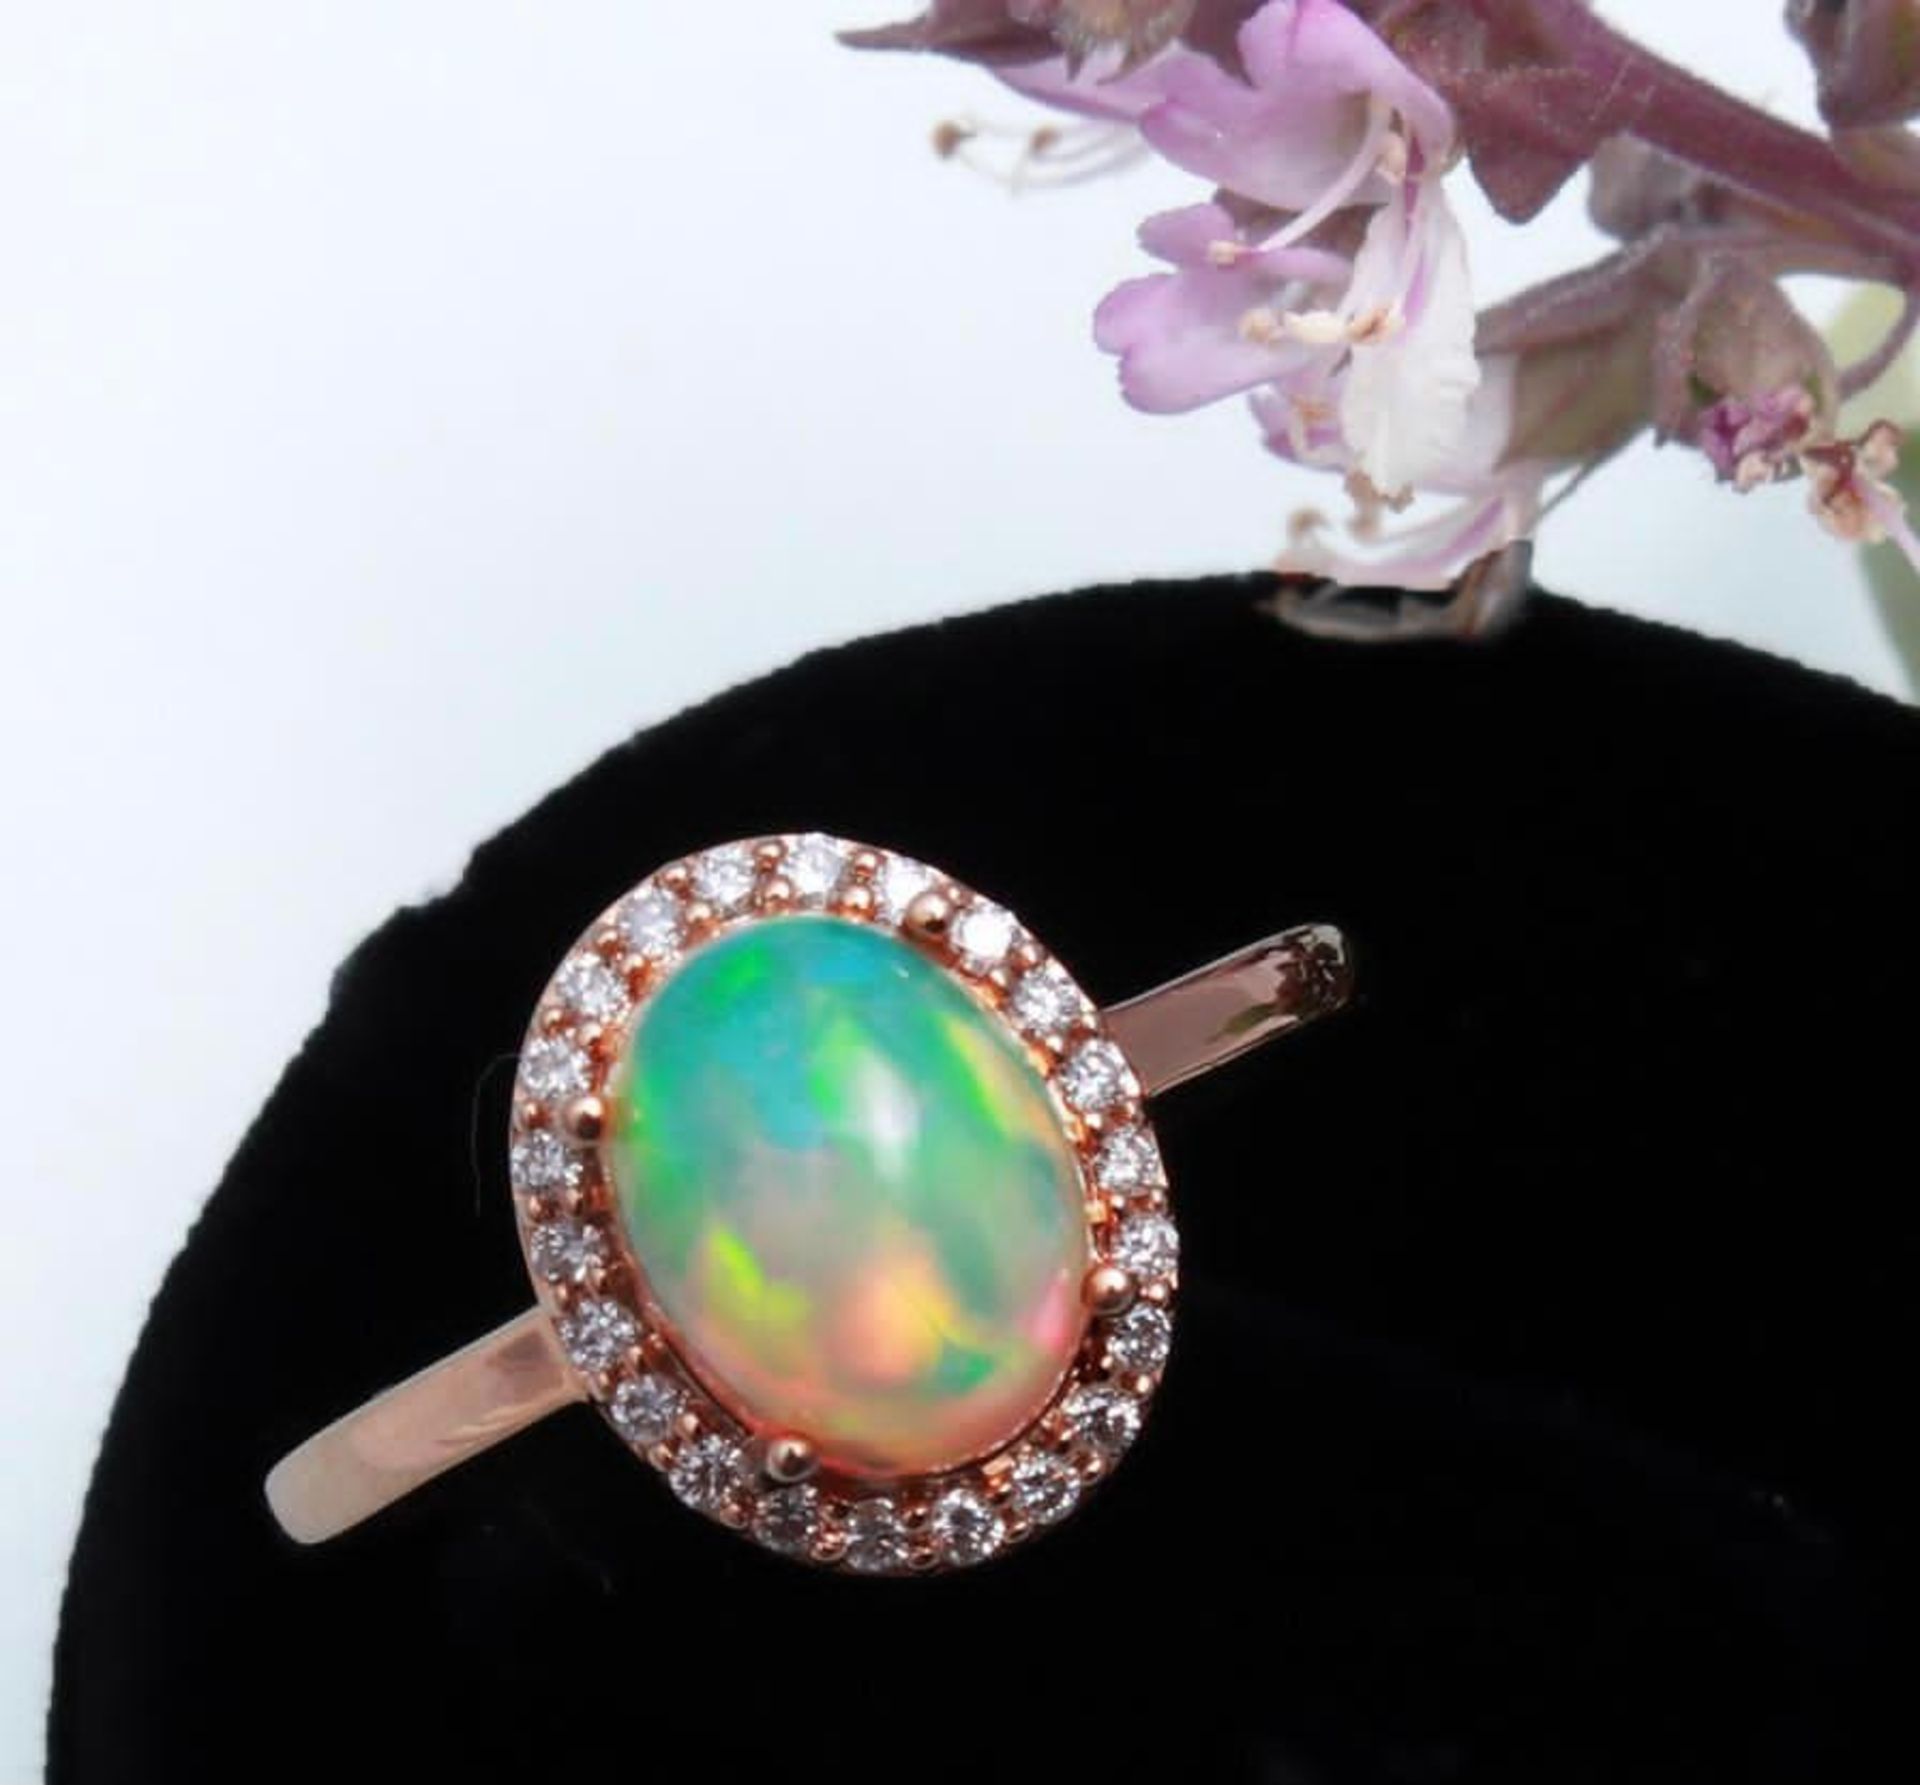 Beautiful Natural Opal Ring With Diamonds And 18k Gold - Image 3 of 3